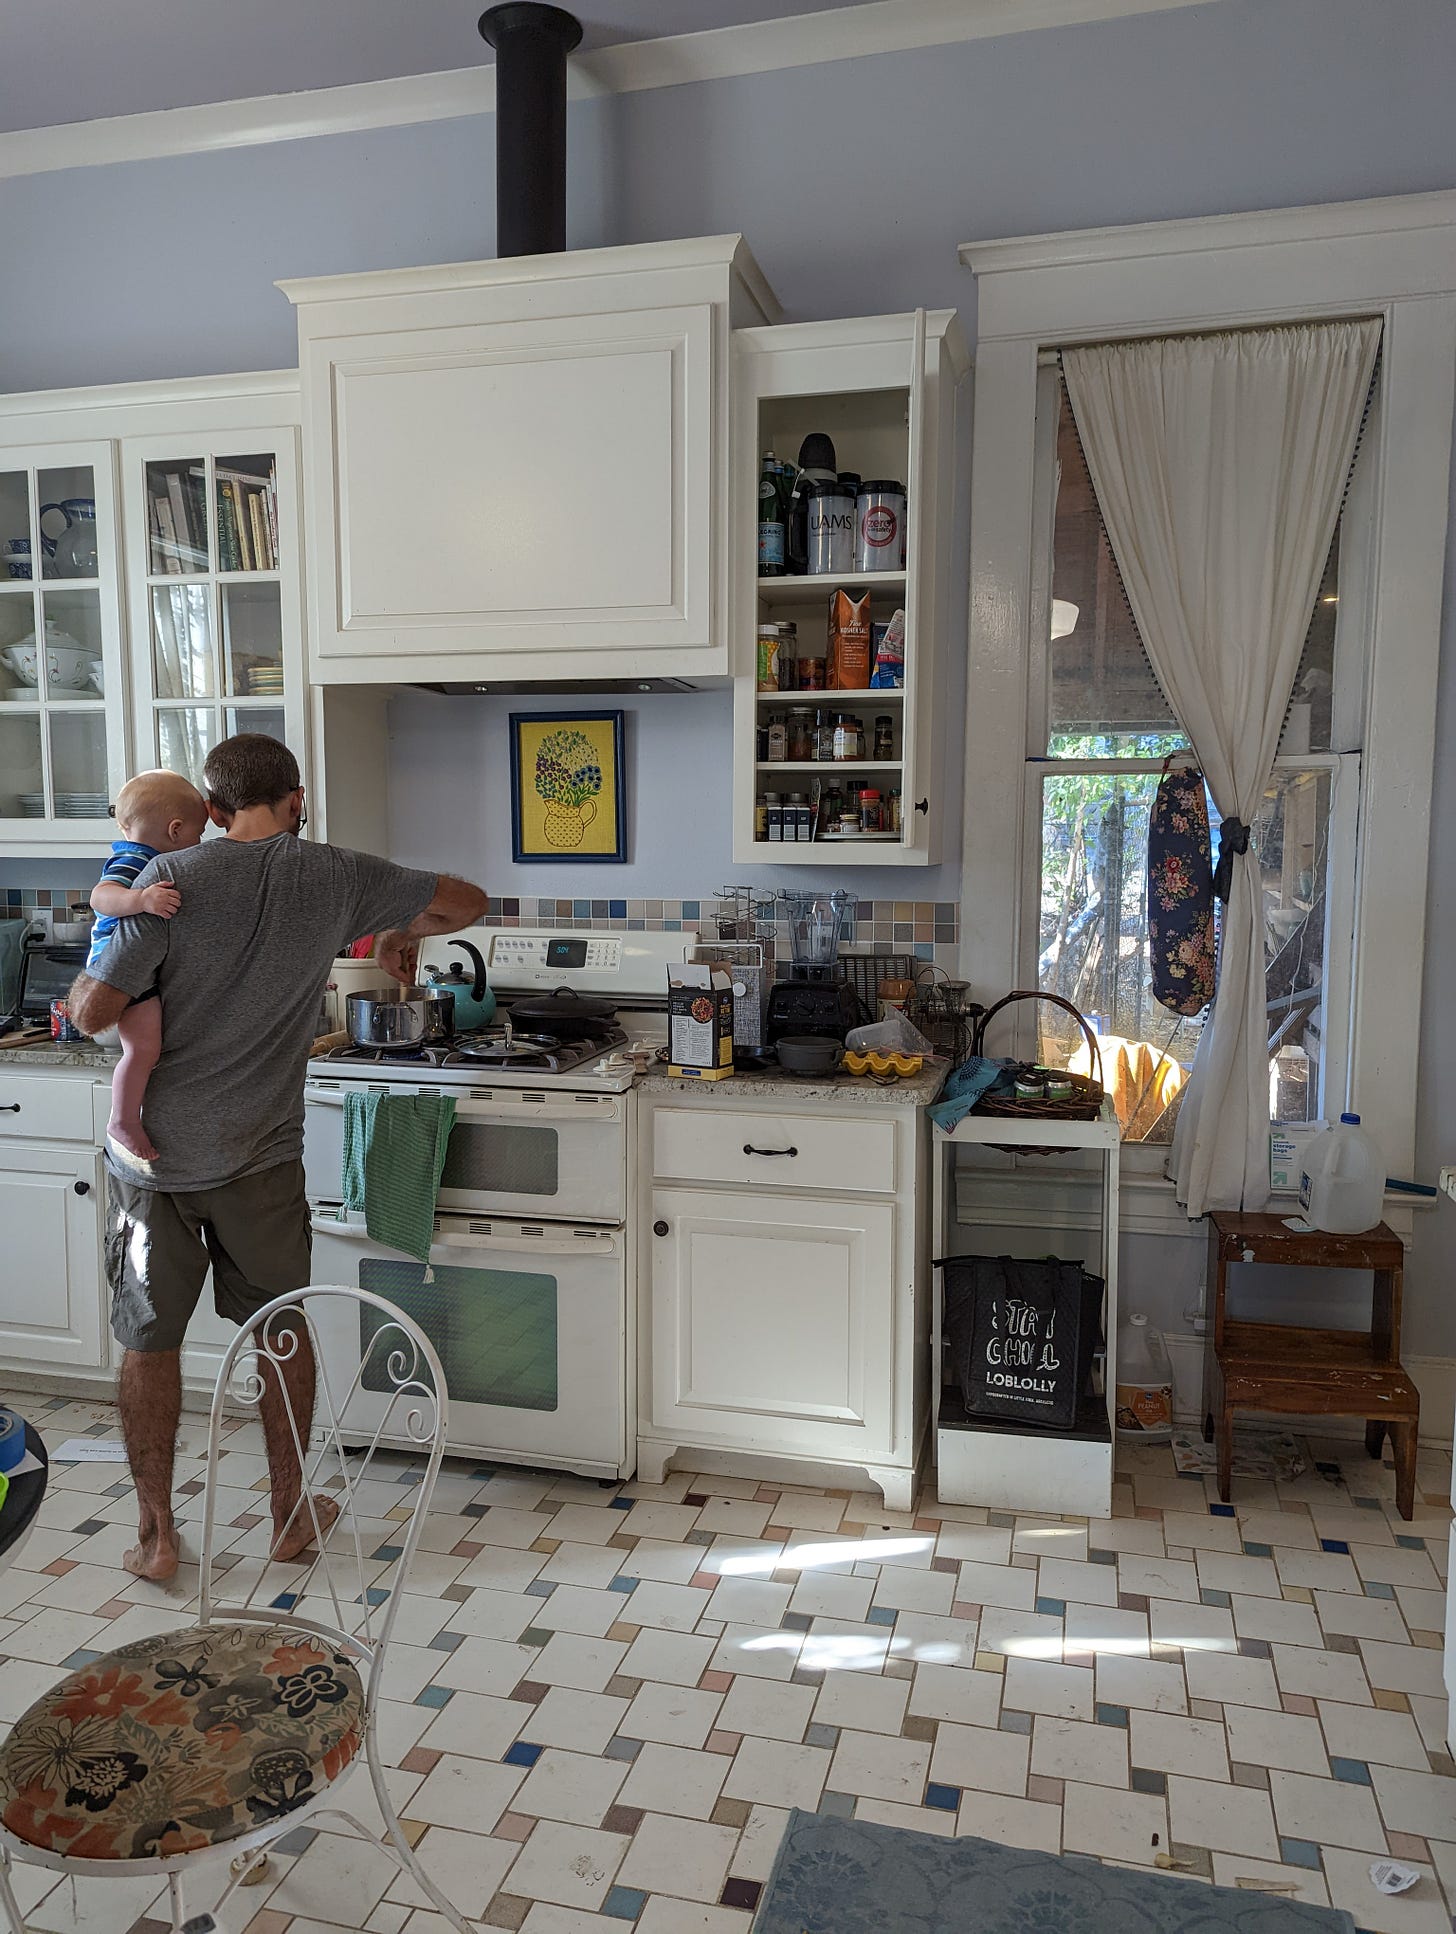 A man holds a baby while cooking with his back to the camera in a kitchen with white glass-front cabinets, lots of natural light, and a colorful checked floor tile